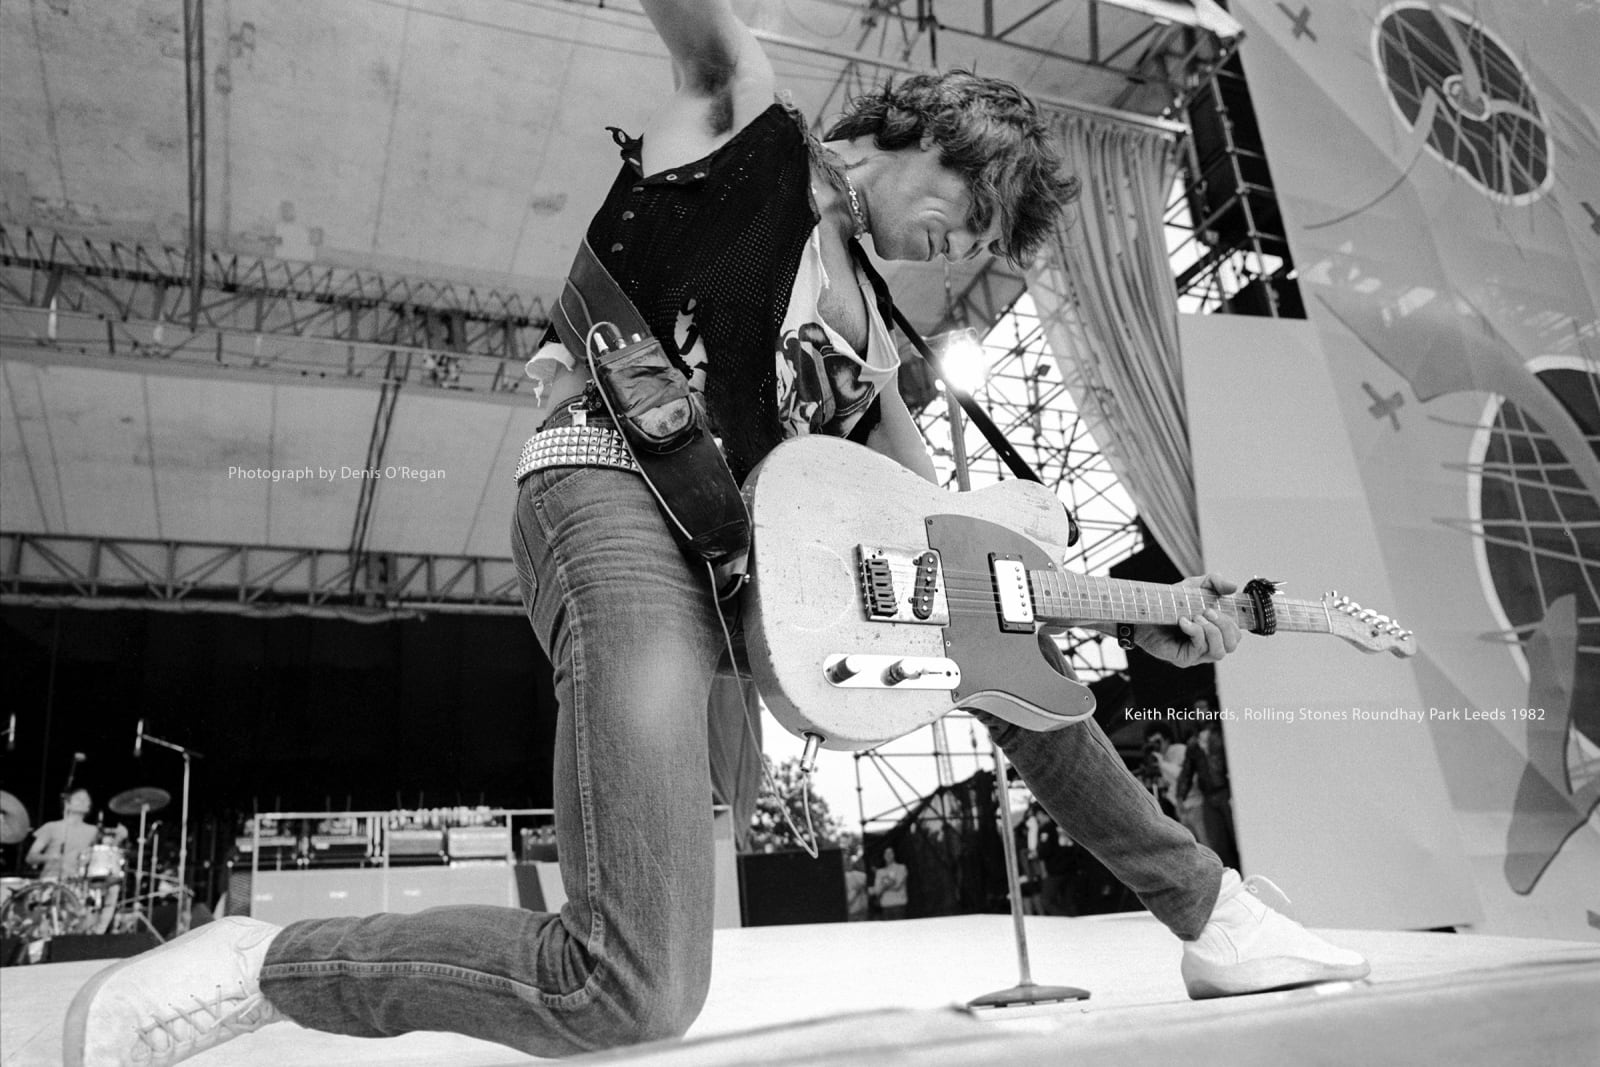 ROLLING STONES, Keith Richards Roundhay Park, 1982